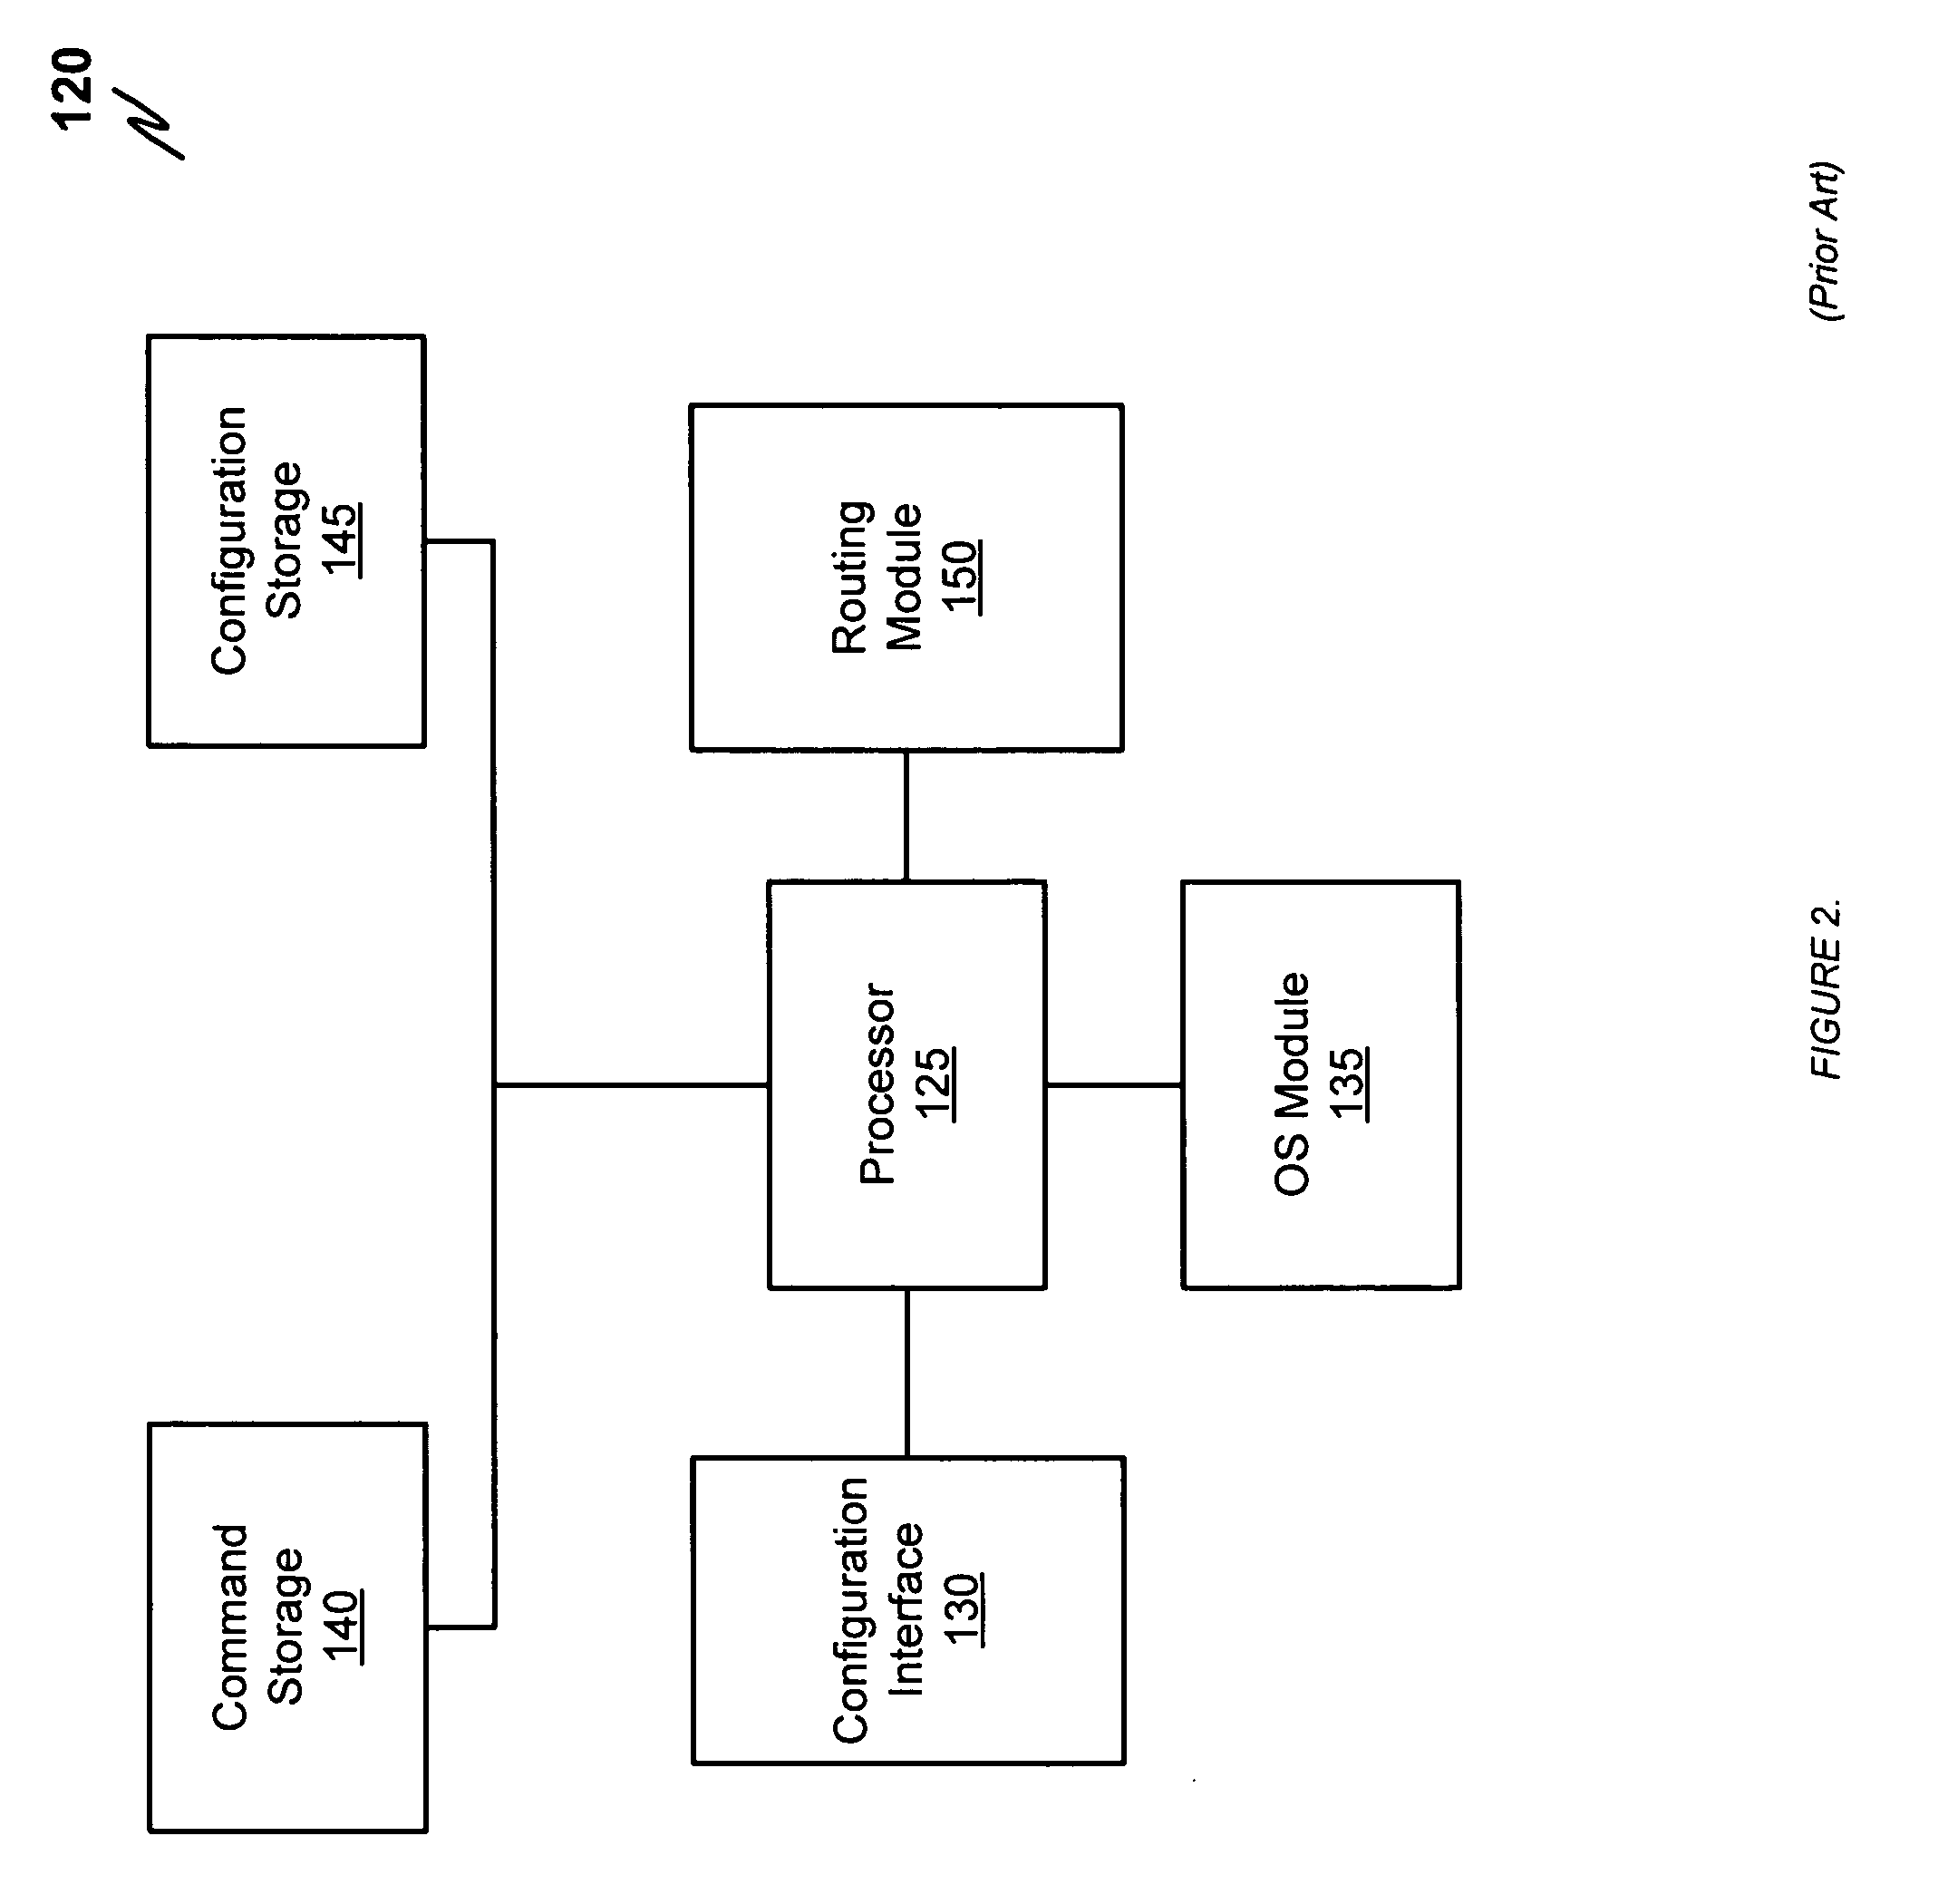 System and method for generating a representation of a configuration schema